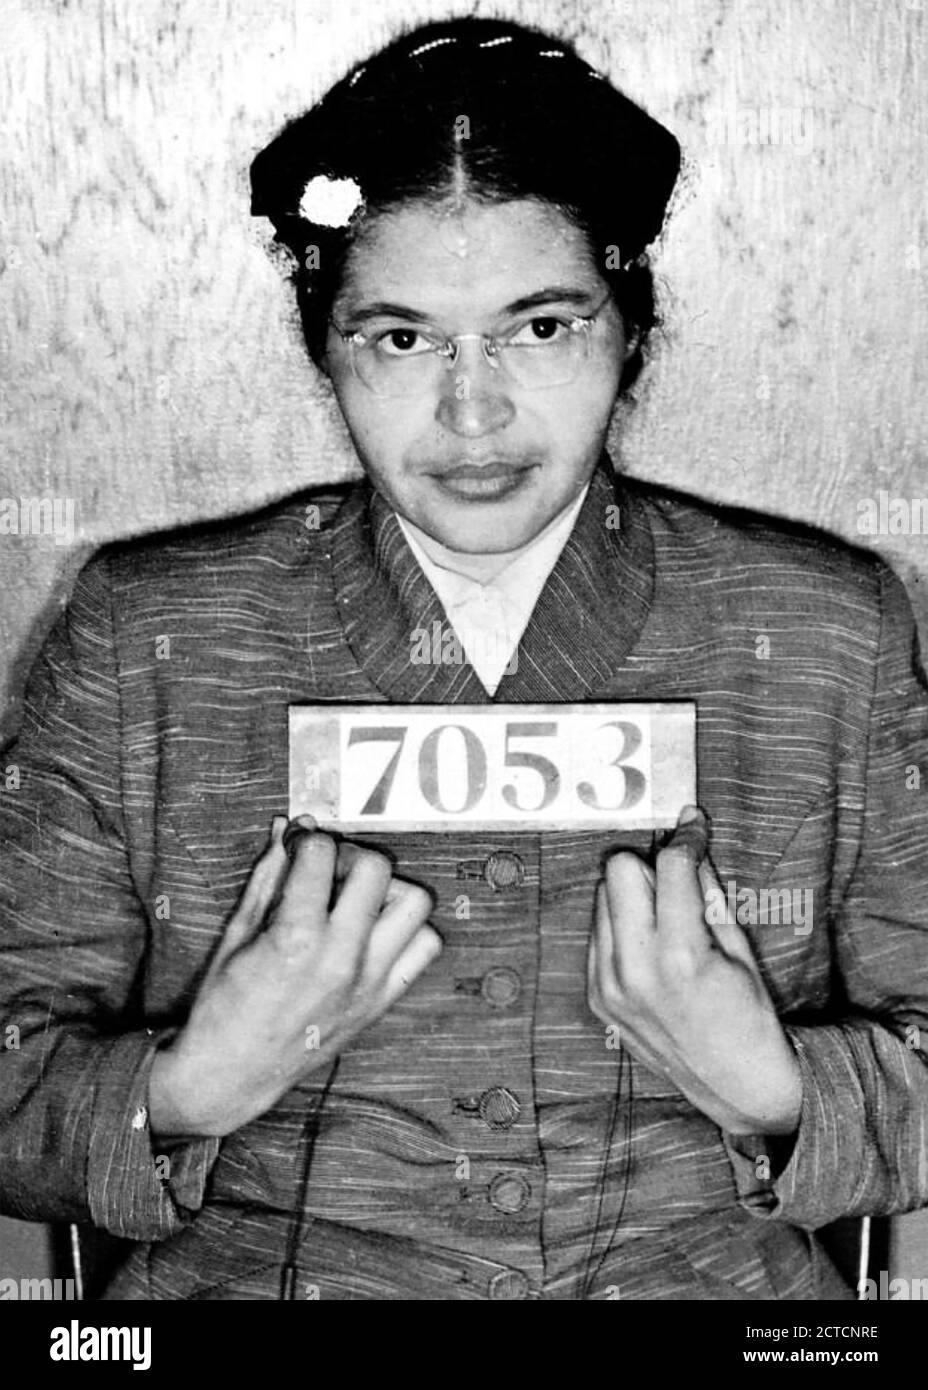 ROSA PARKS (1913-2005) American civil rights activist. Police mug shot following her arrest in February 1956 during the Montgomery bus boycott in Alabama. Photo: Alabama Dept of Archives and History. Stock Photo